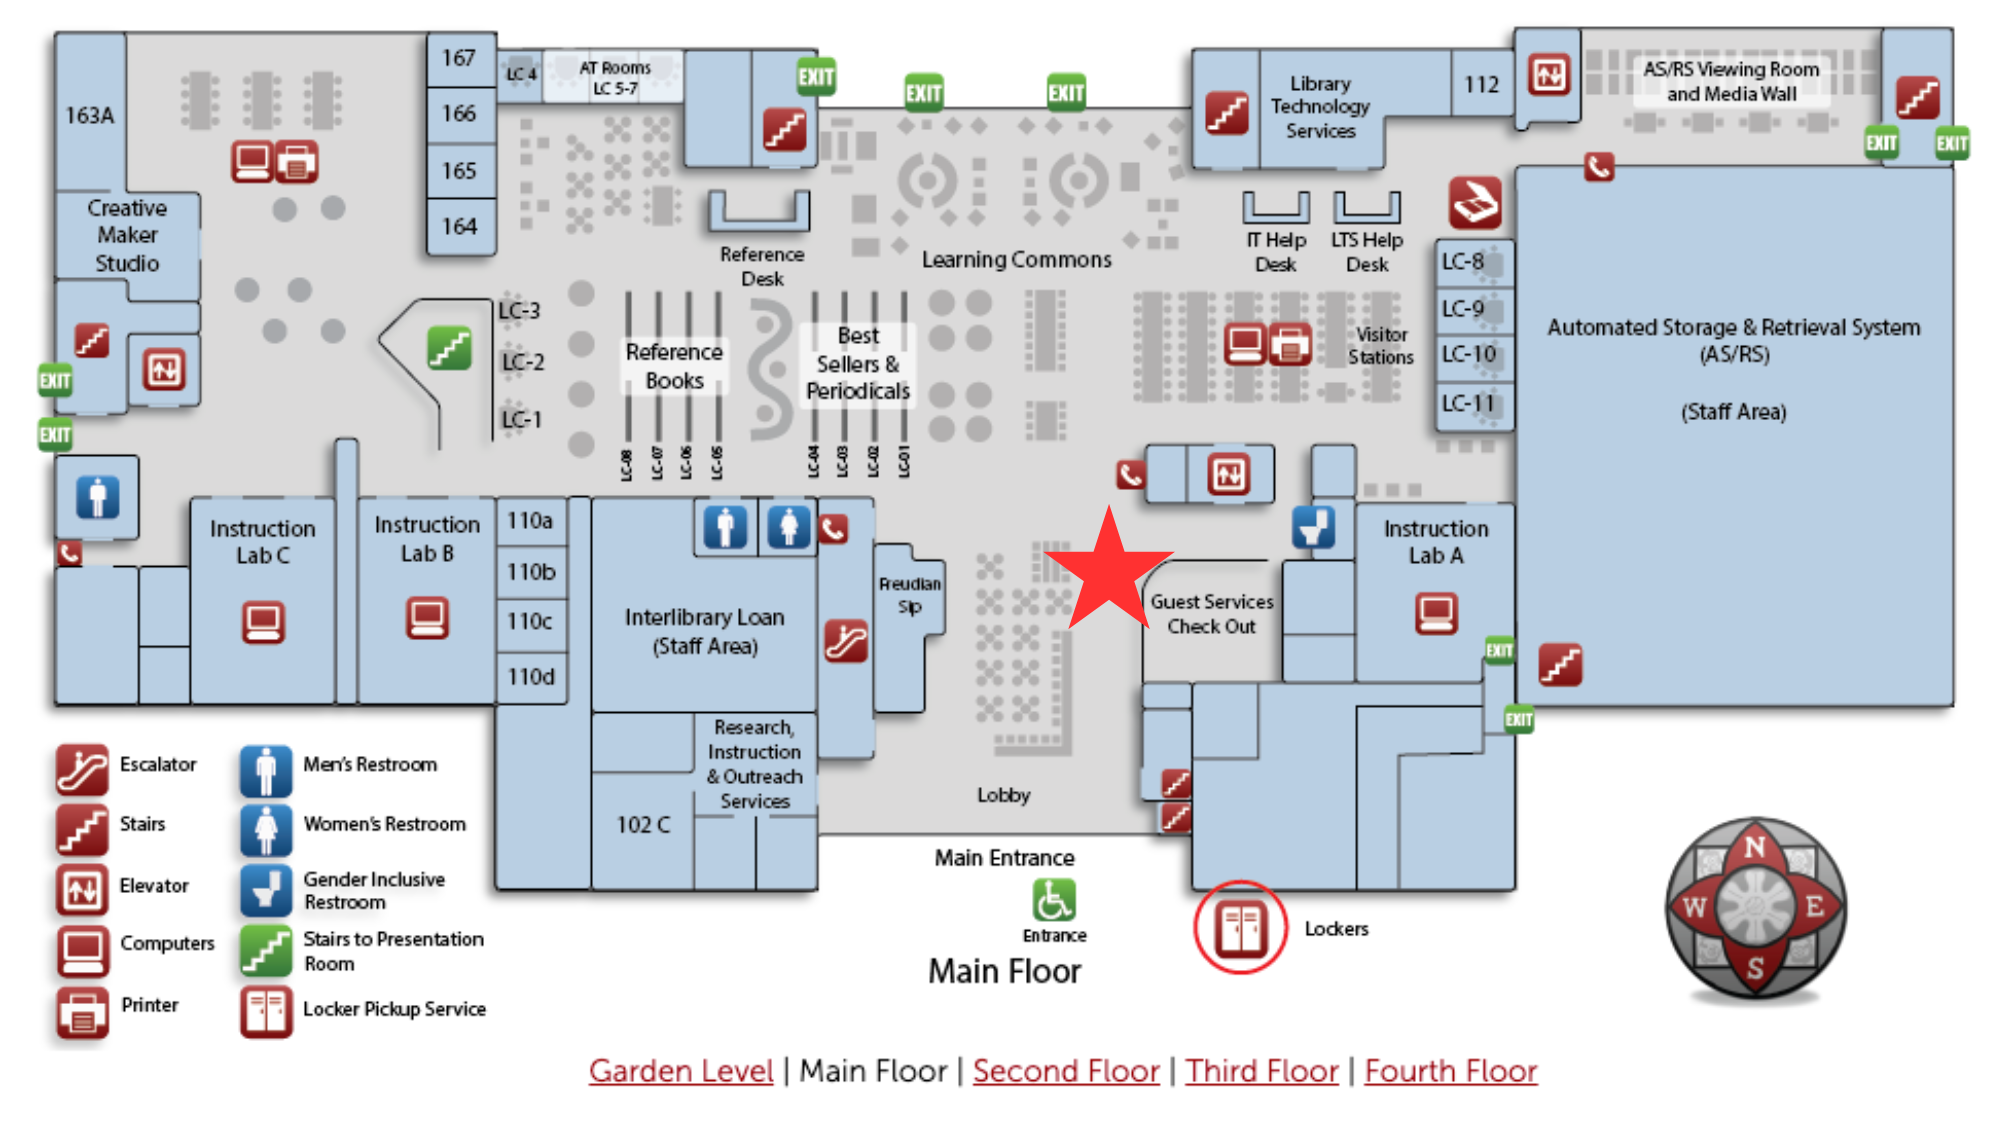 Map location of Guest Services desk